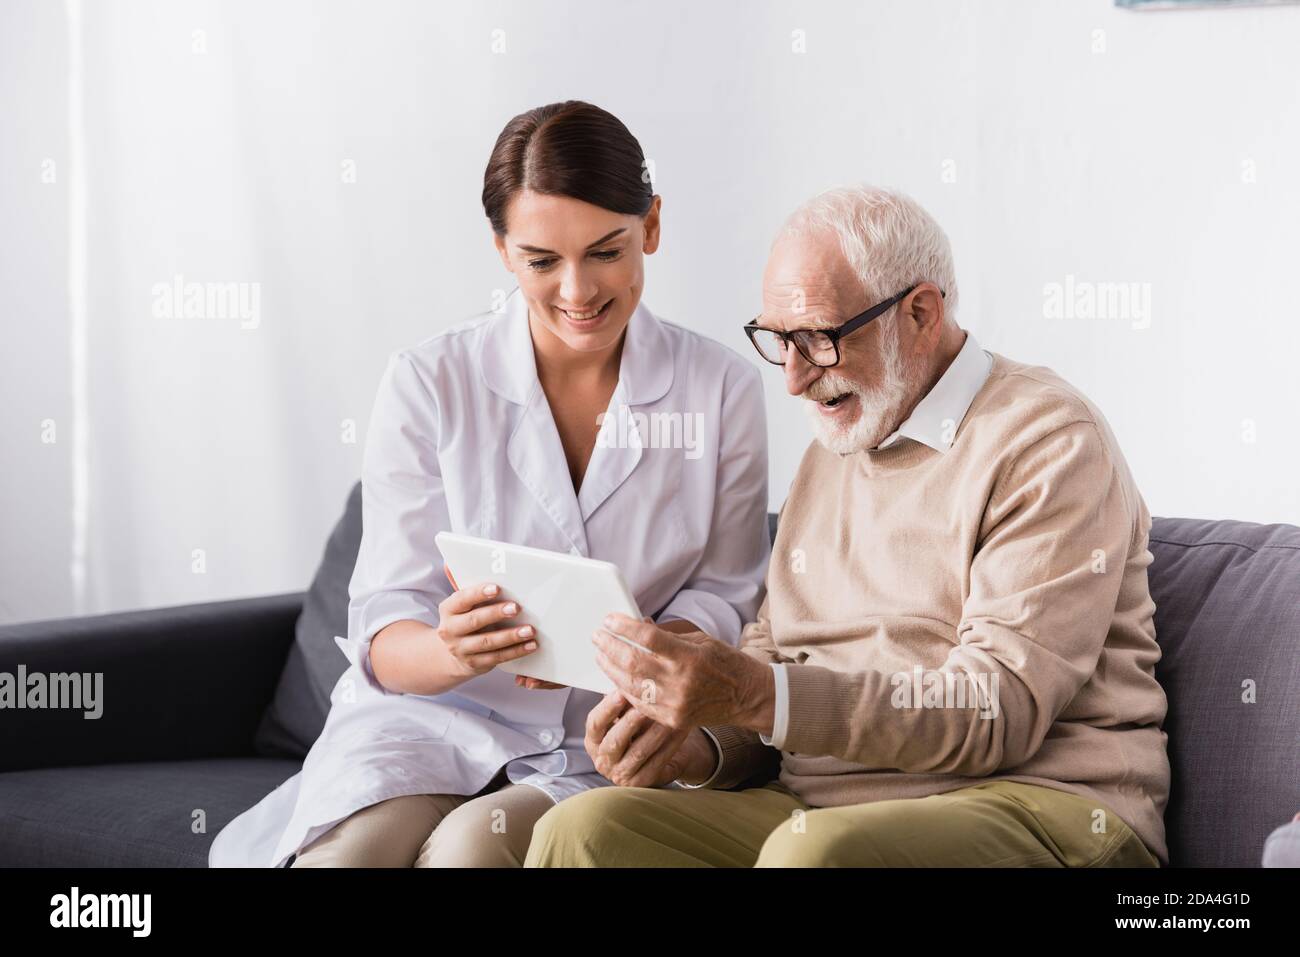 brunette social worker showing digital tablet to smiling aged man at home Stock Photo